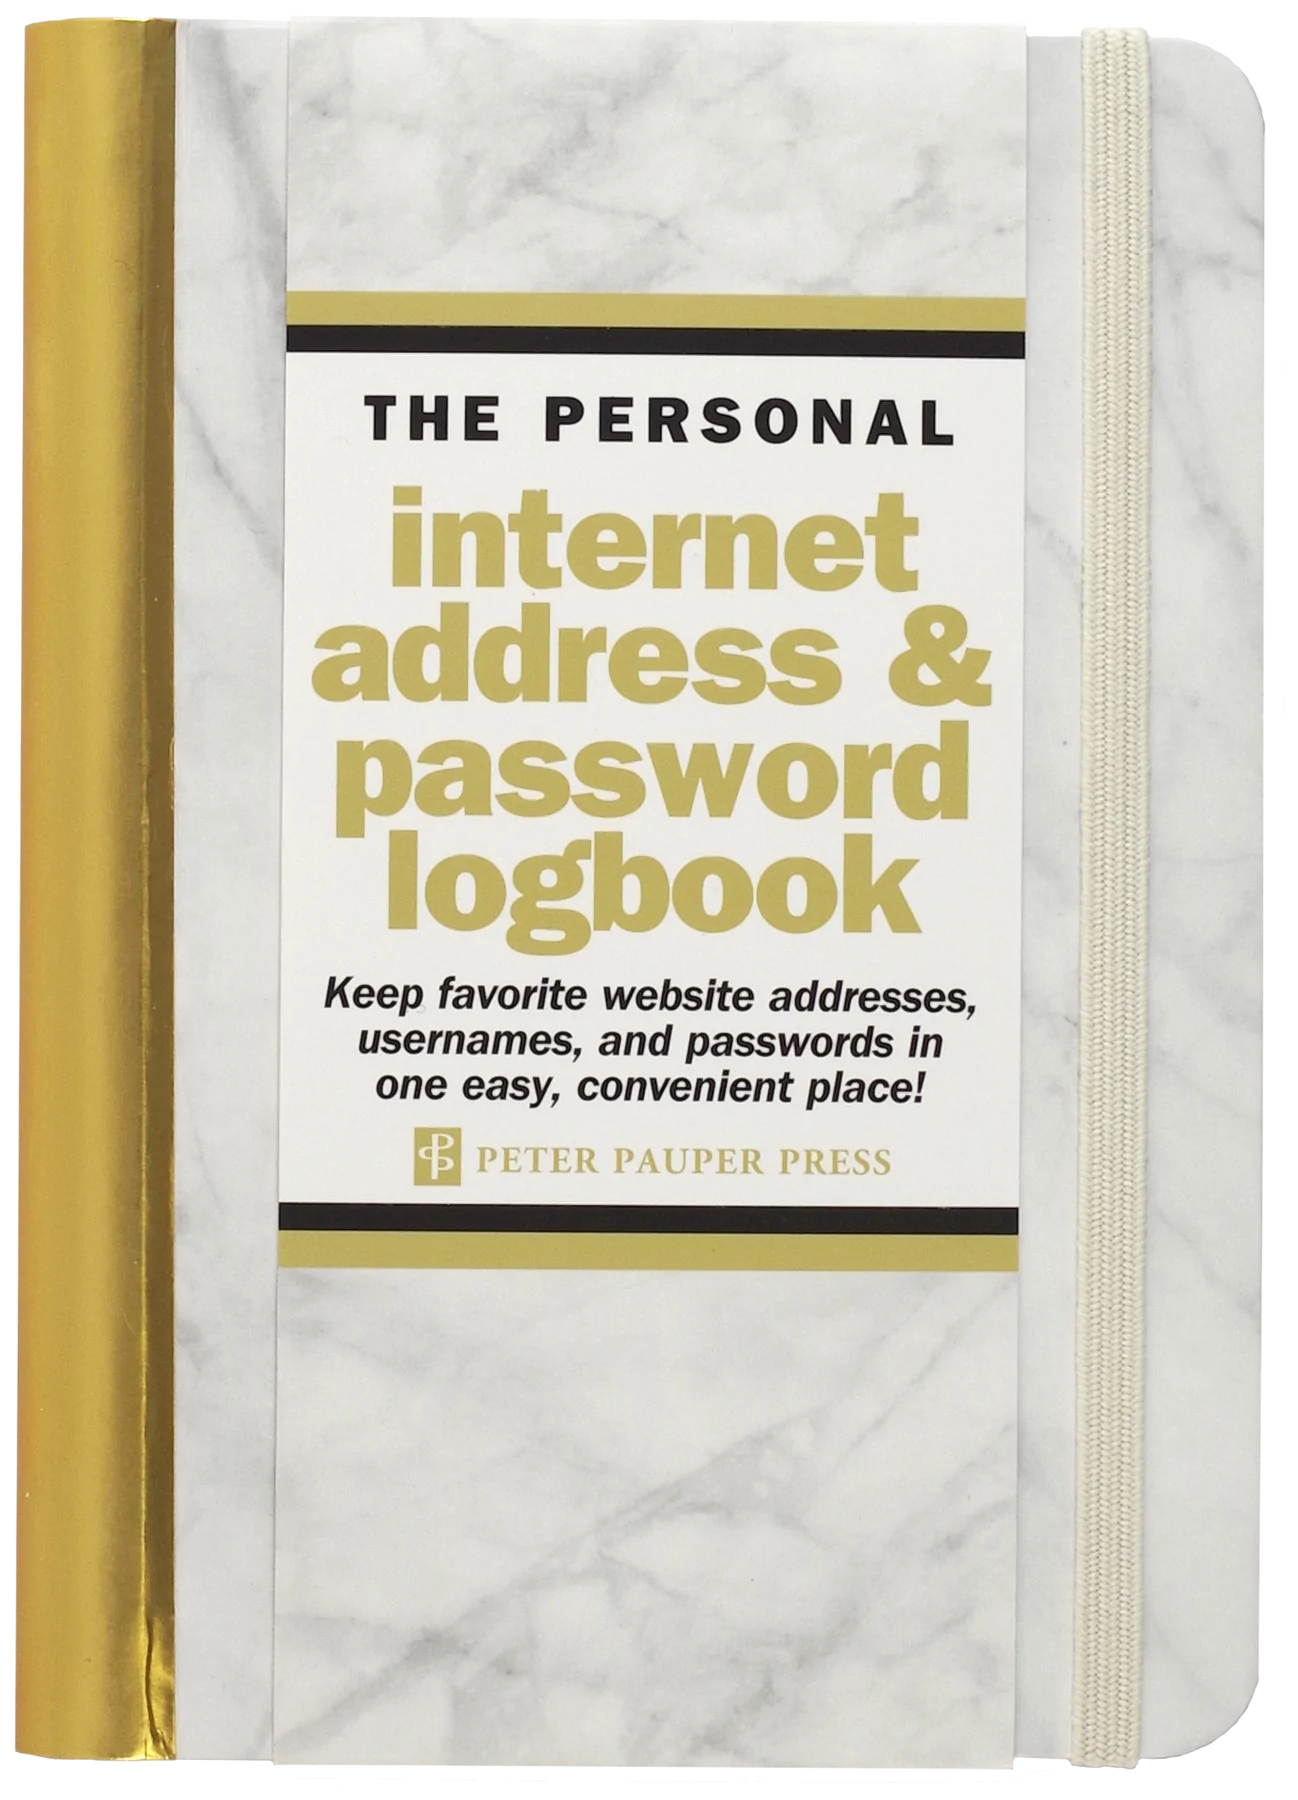 The Personal Internet Address & Password Marble Logbook